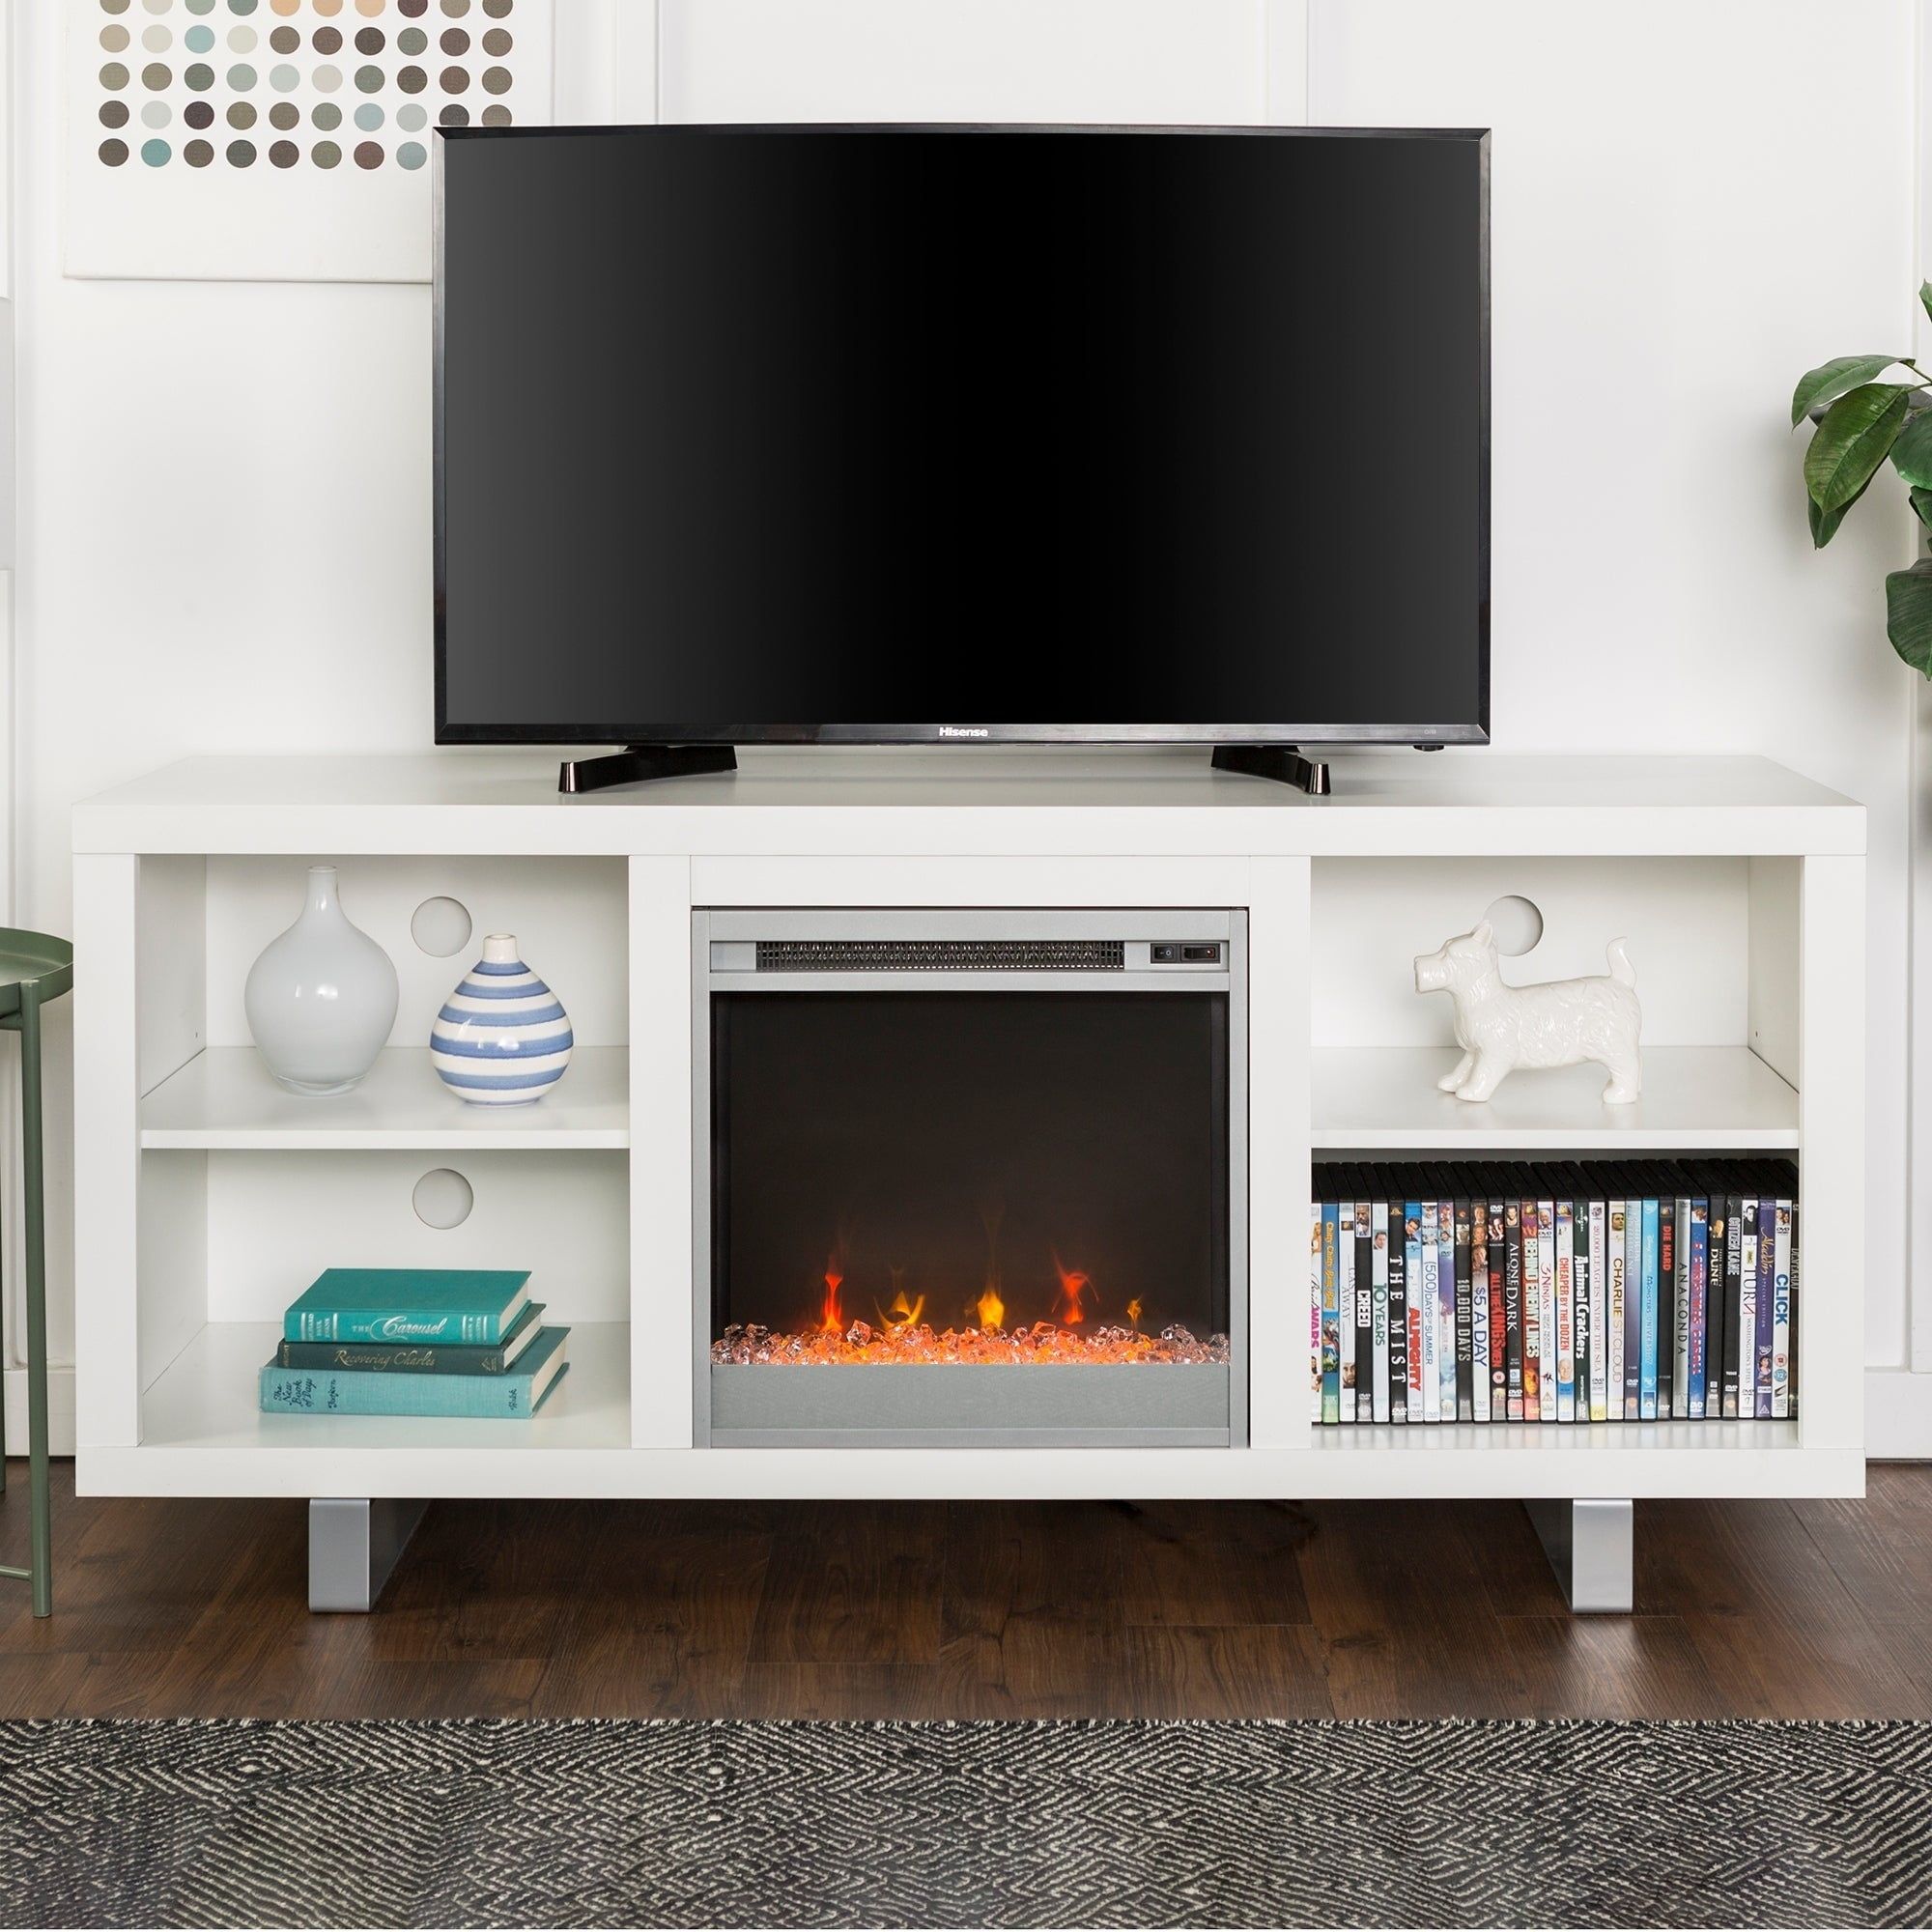 Middlebrook Designs 58" Modern Fireplace Tv Stand Console – Walmart Intended For Modern Fireplace Tv Stands (Gallery 12 of 20)